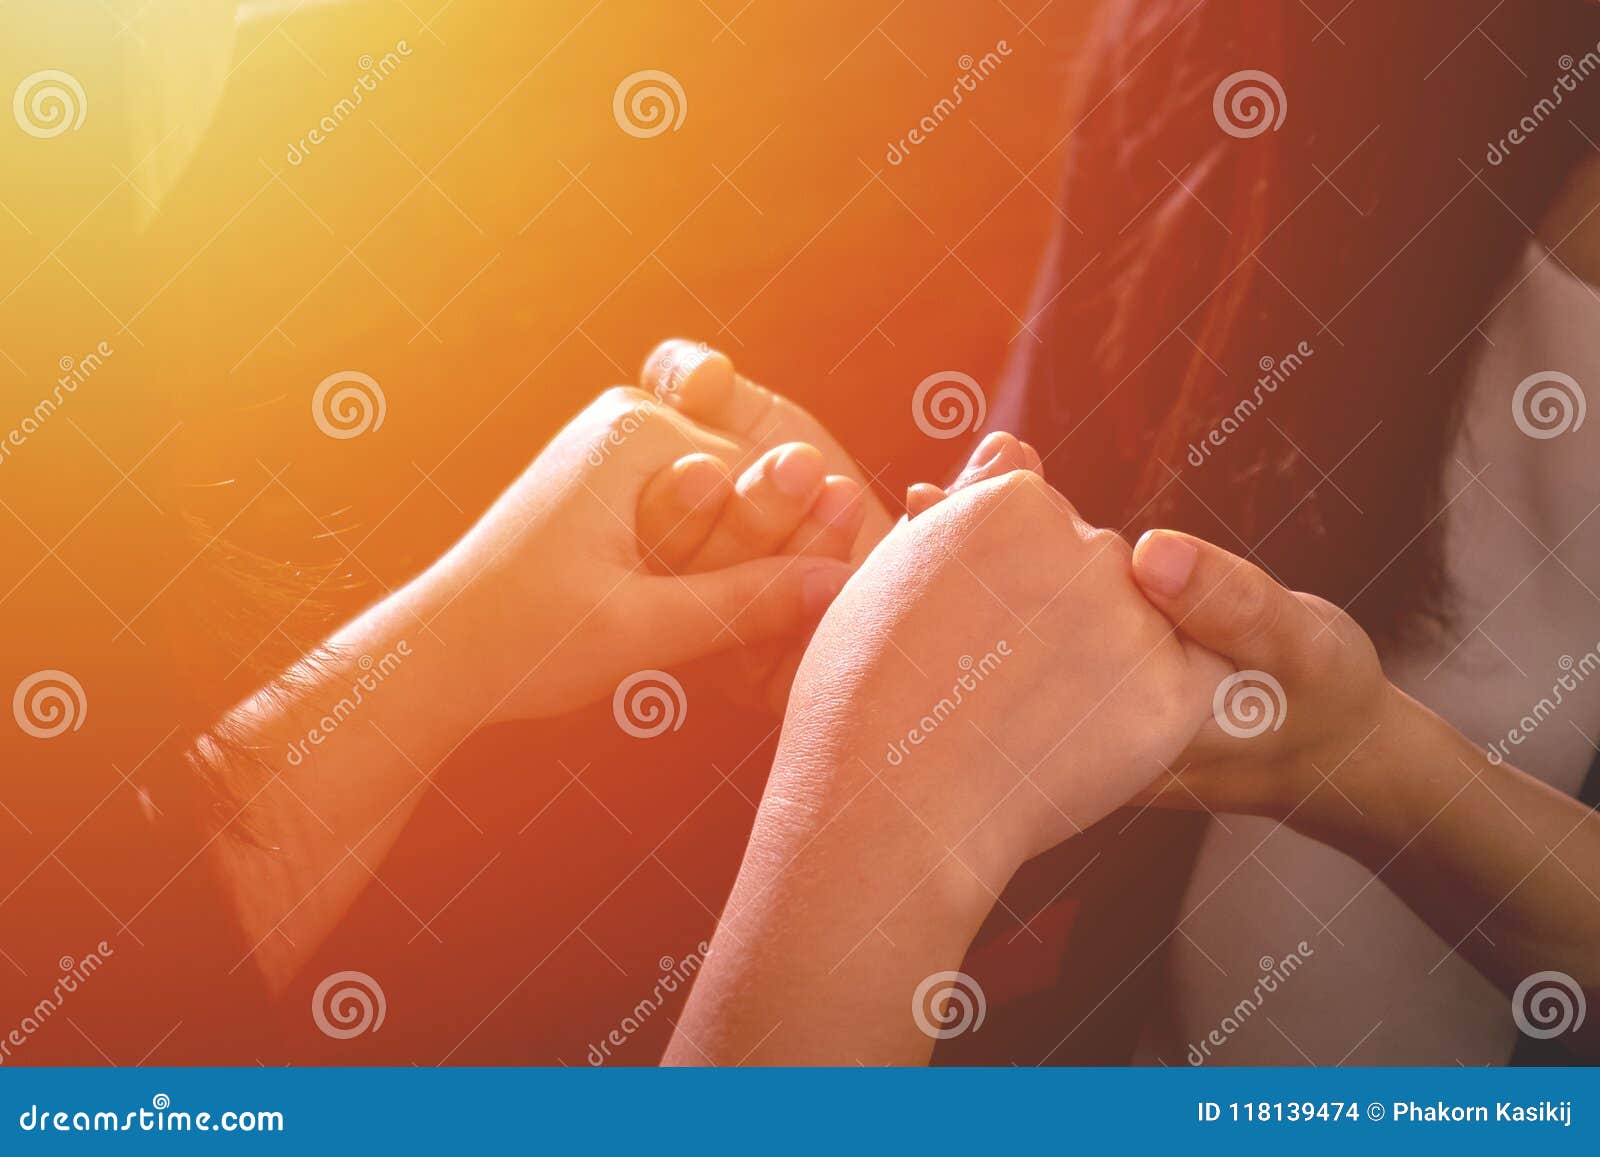 couple christian female friend holding hands together and pray t